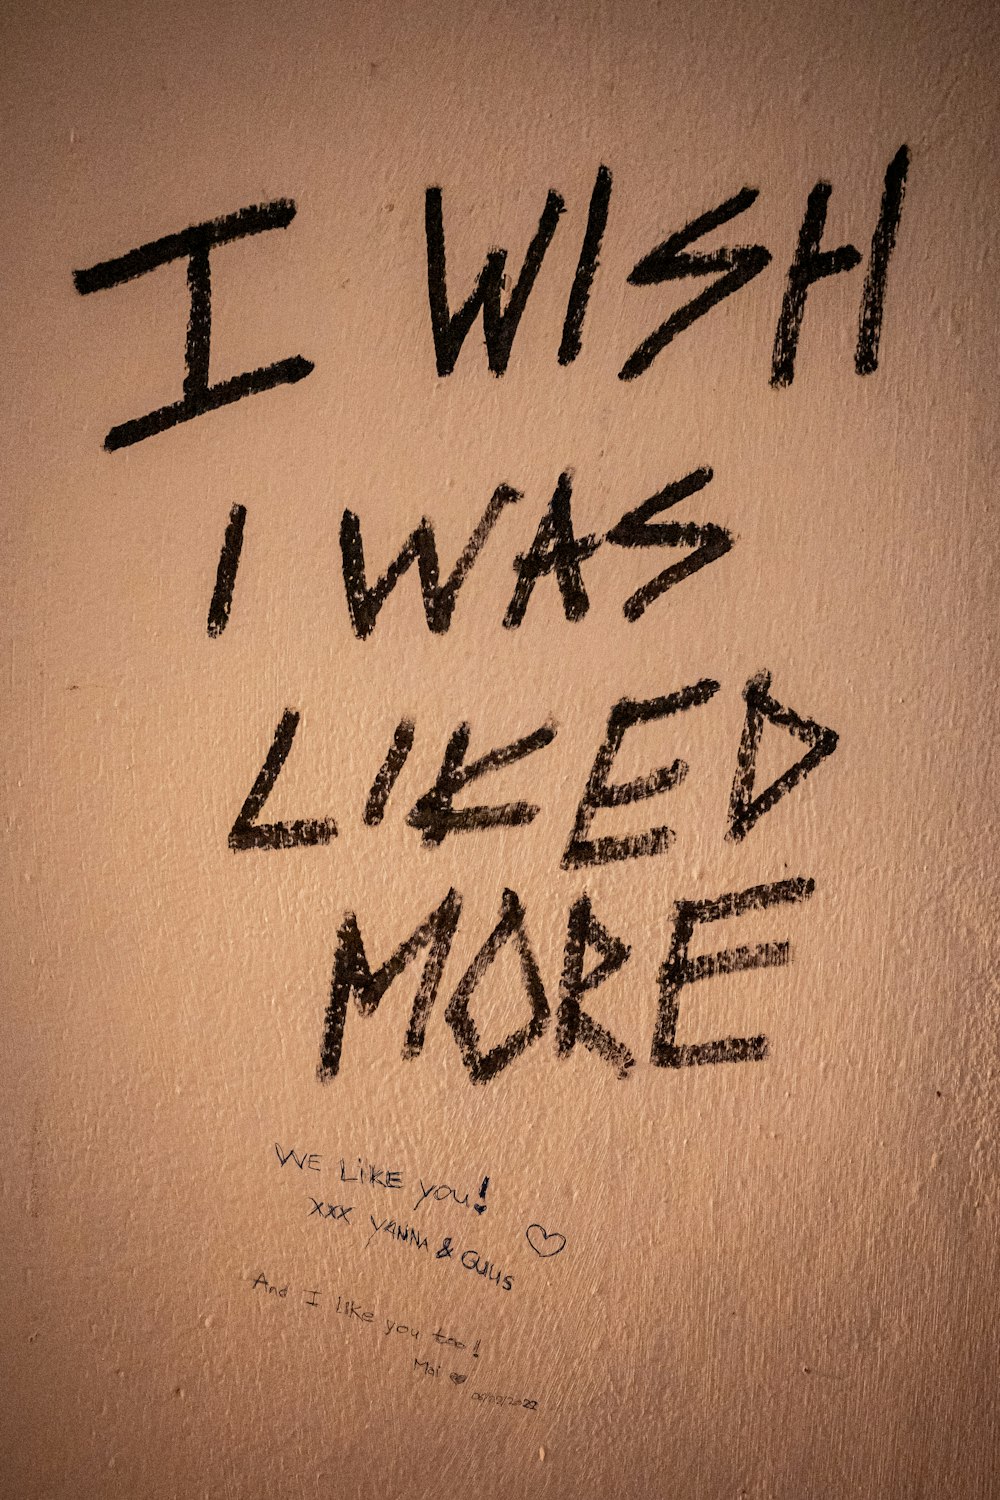 graffiti written on a wall that says i wish i was liked more